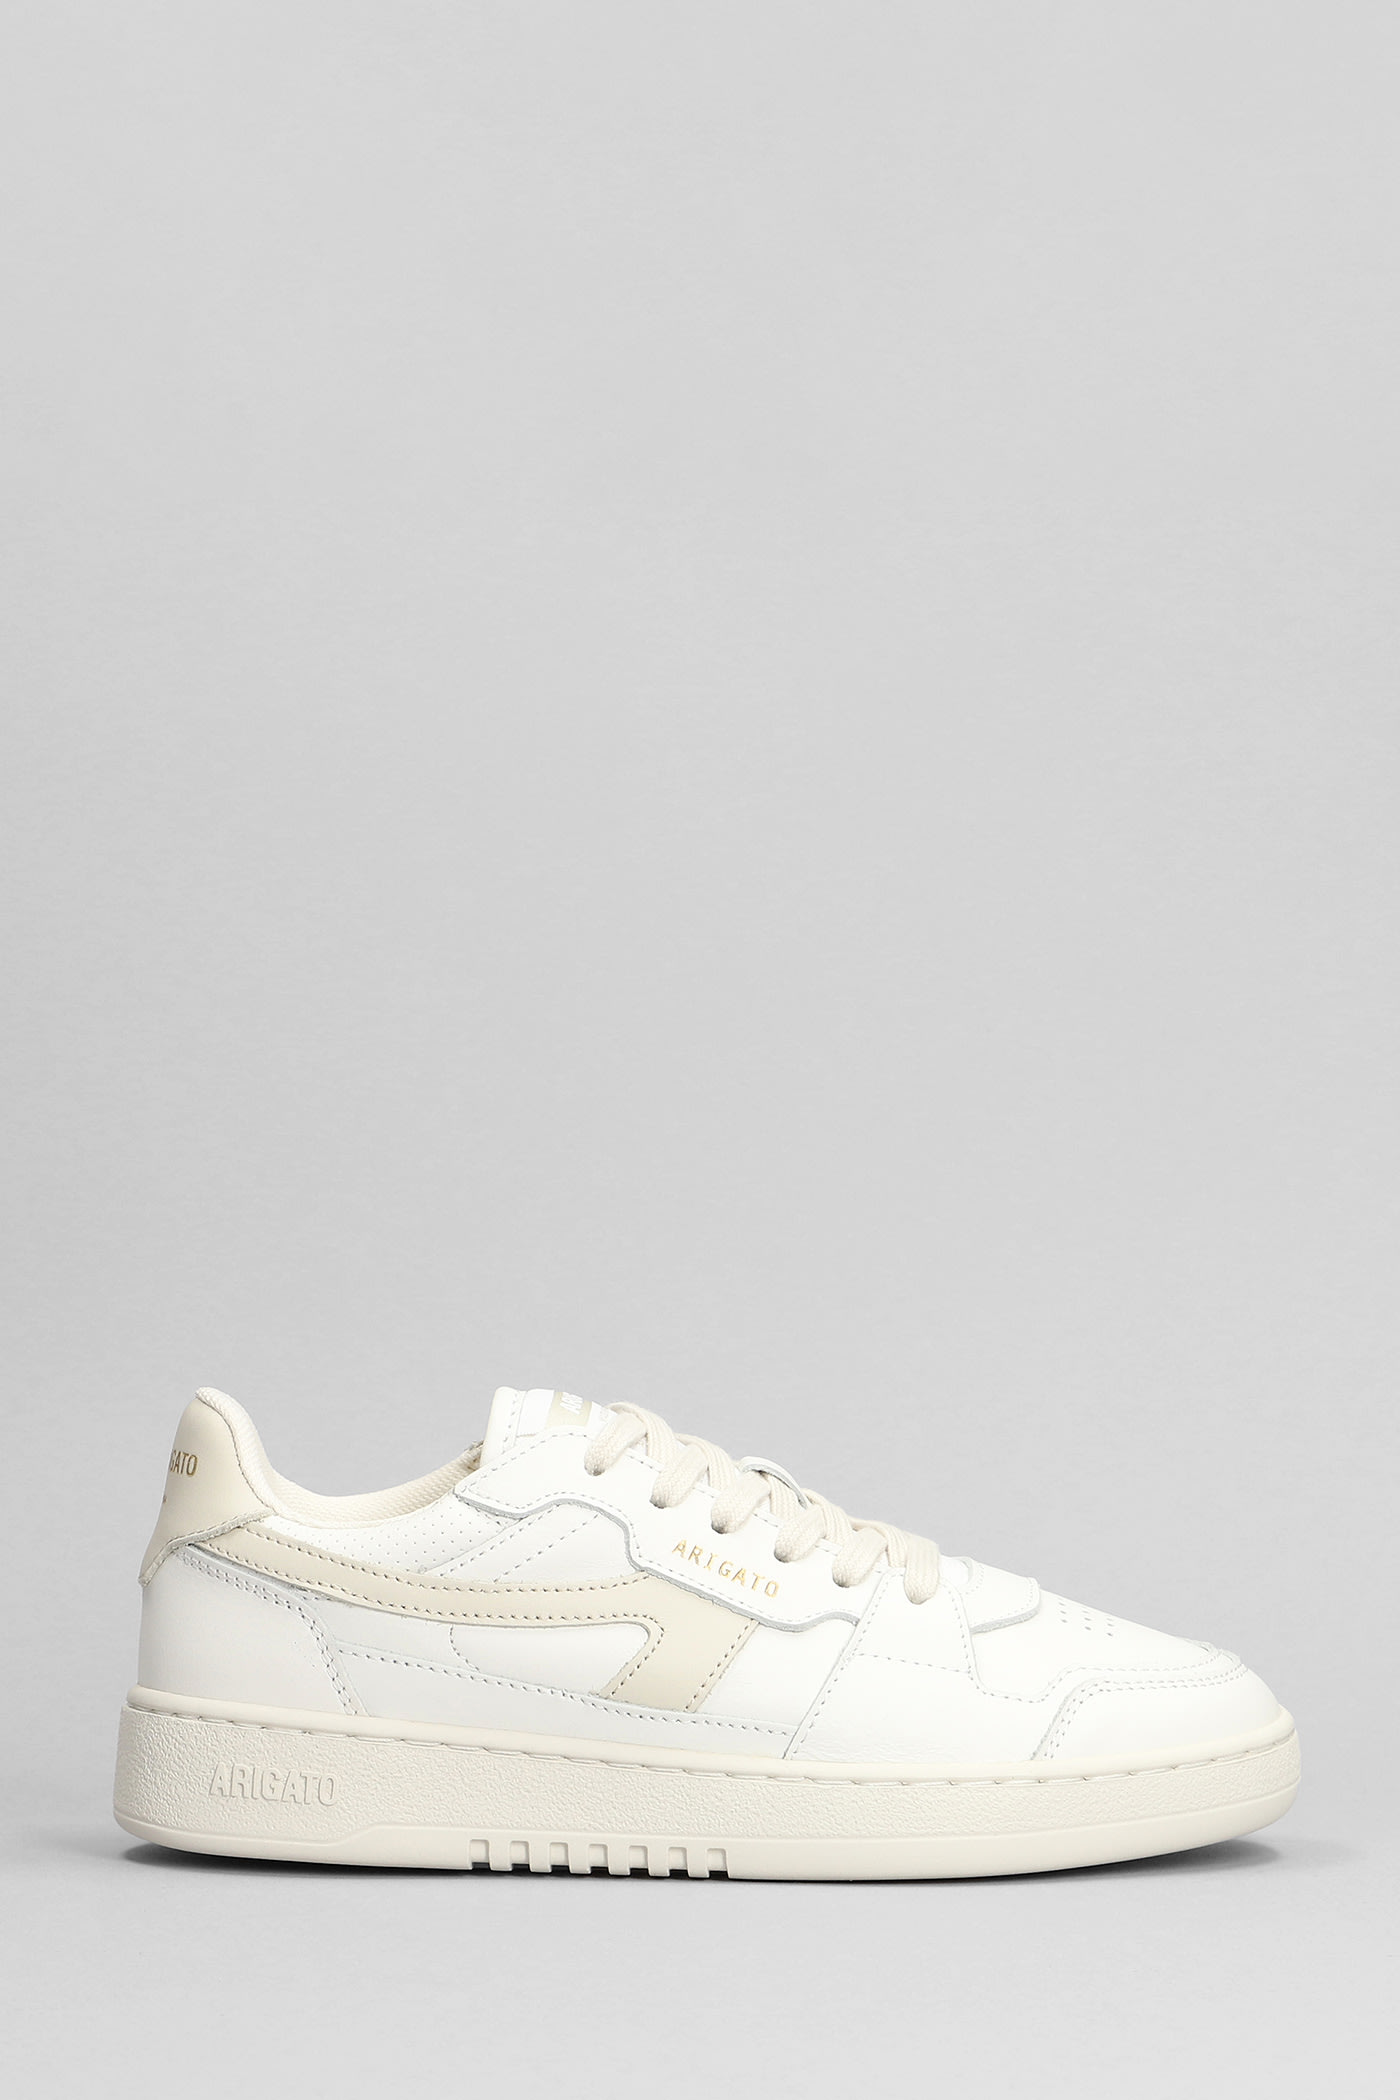 Dice-a Sneaker Sneakers In White Leather